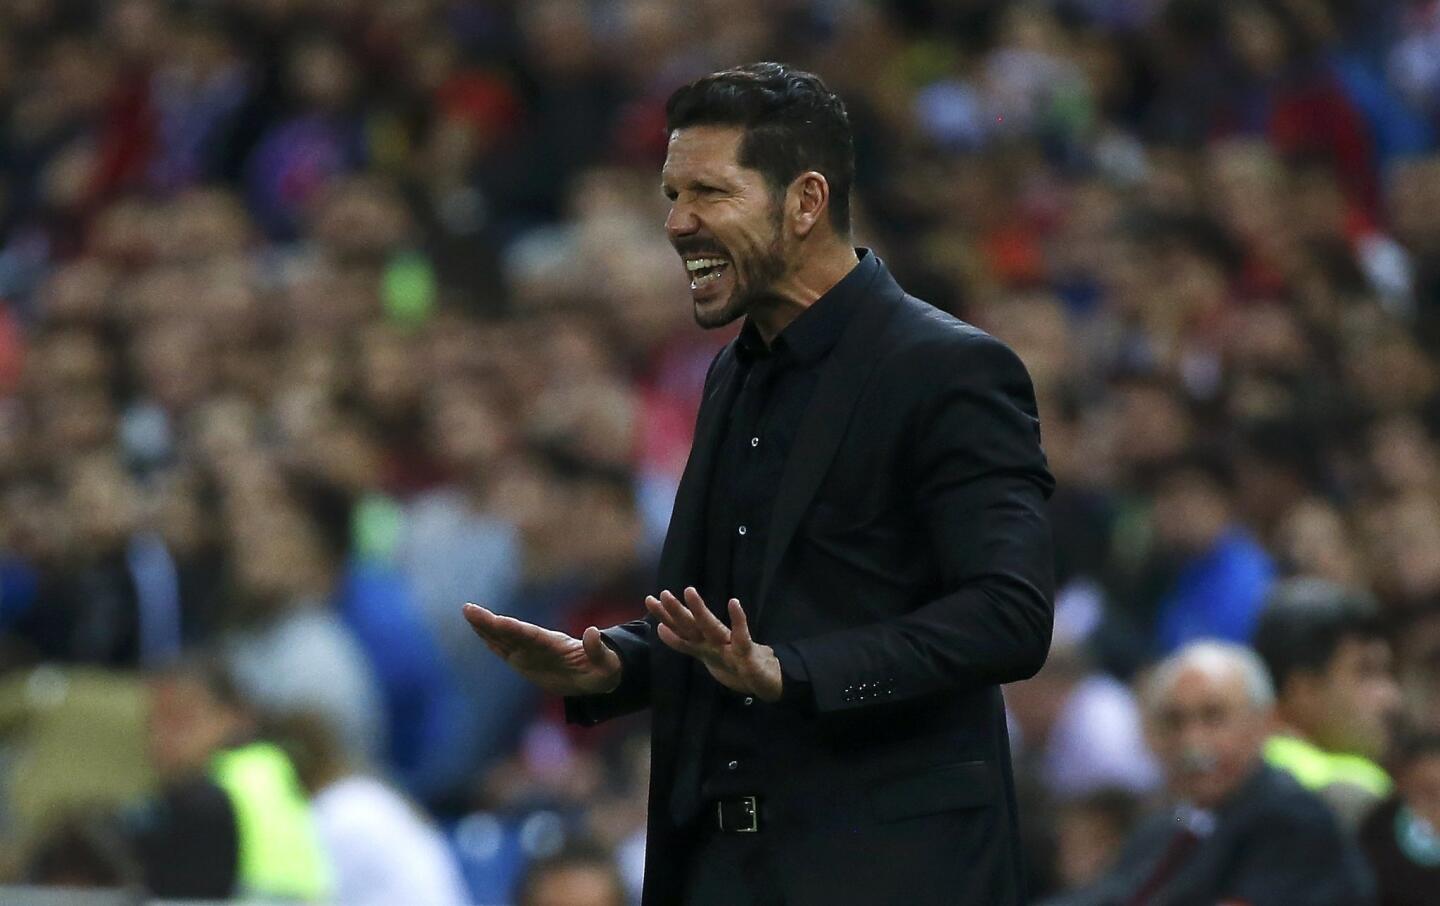 Atletico Madrid's coach Diego "Cholo" Simeone reacts during their Spanish first division derby soccer match in Madrid